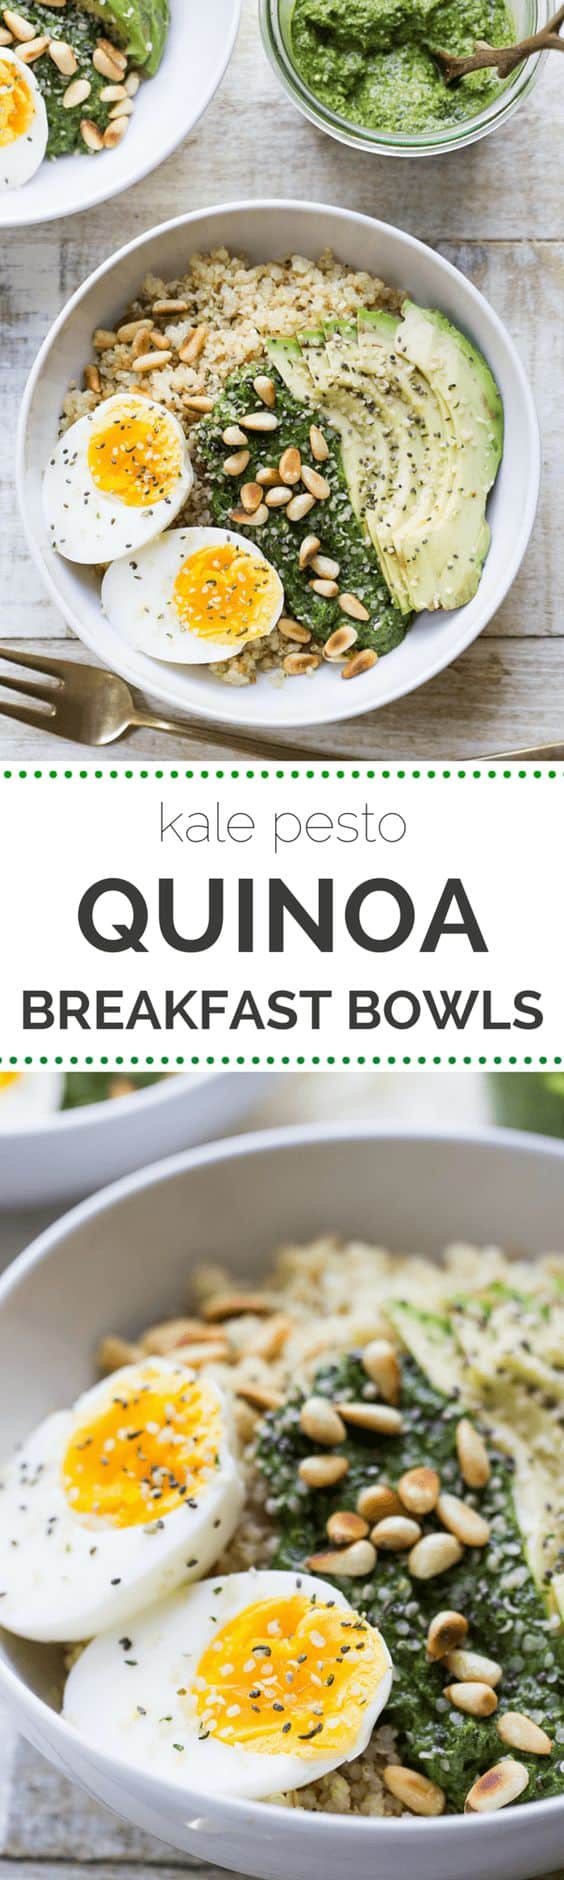 These savory quinoa breakfast bowls are made with a simple blend of homemade kale pesto, soft boiled eggs, fluffy quinoa and sliced avocado.